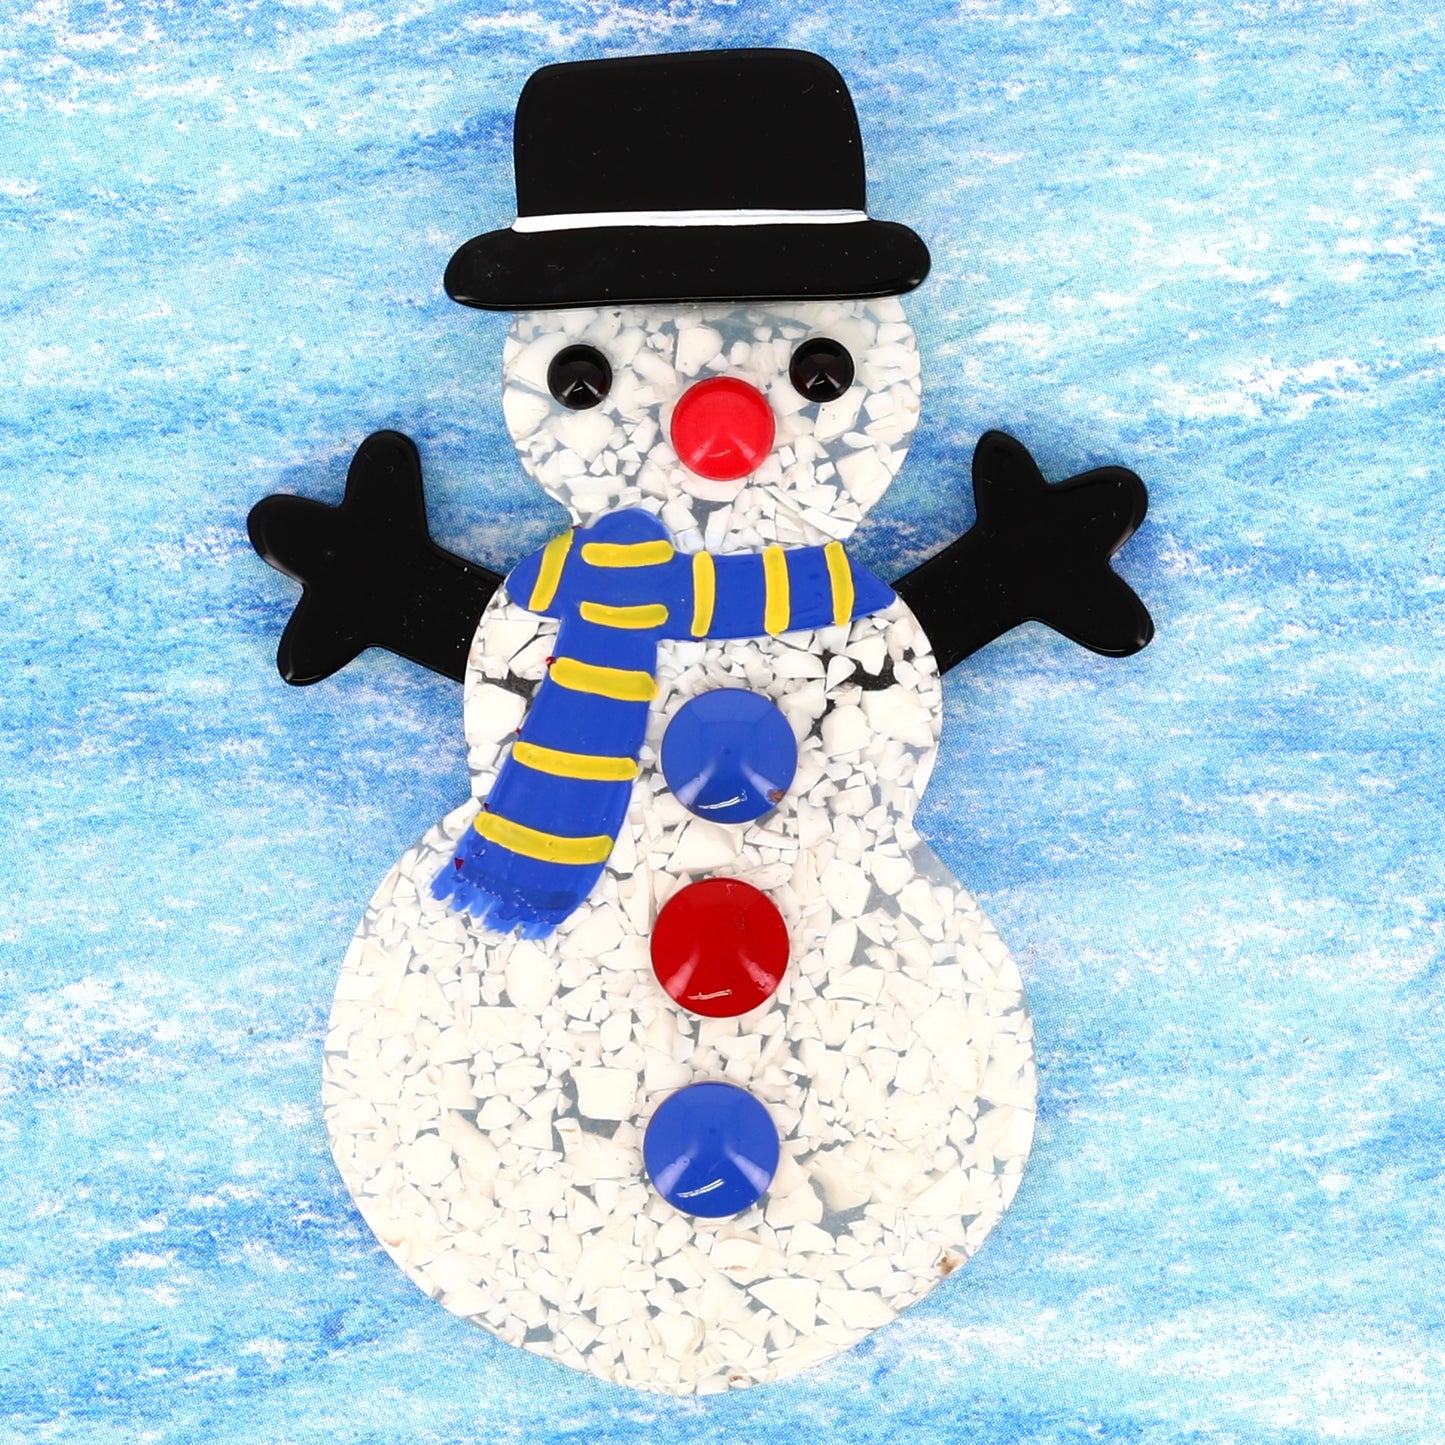 White Mosaic Snowman Brooch with a Blue scarf